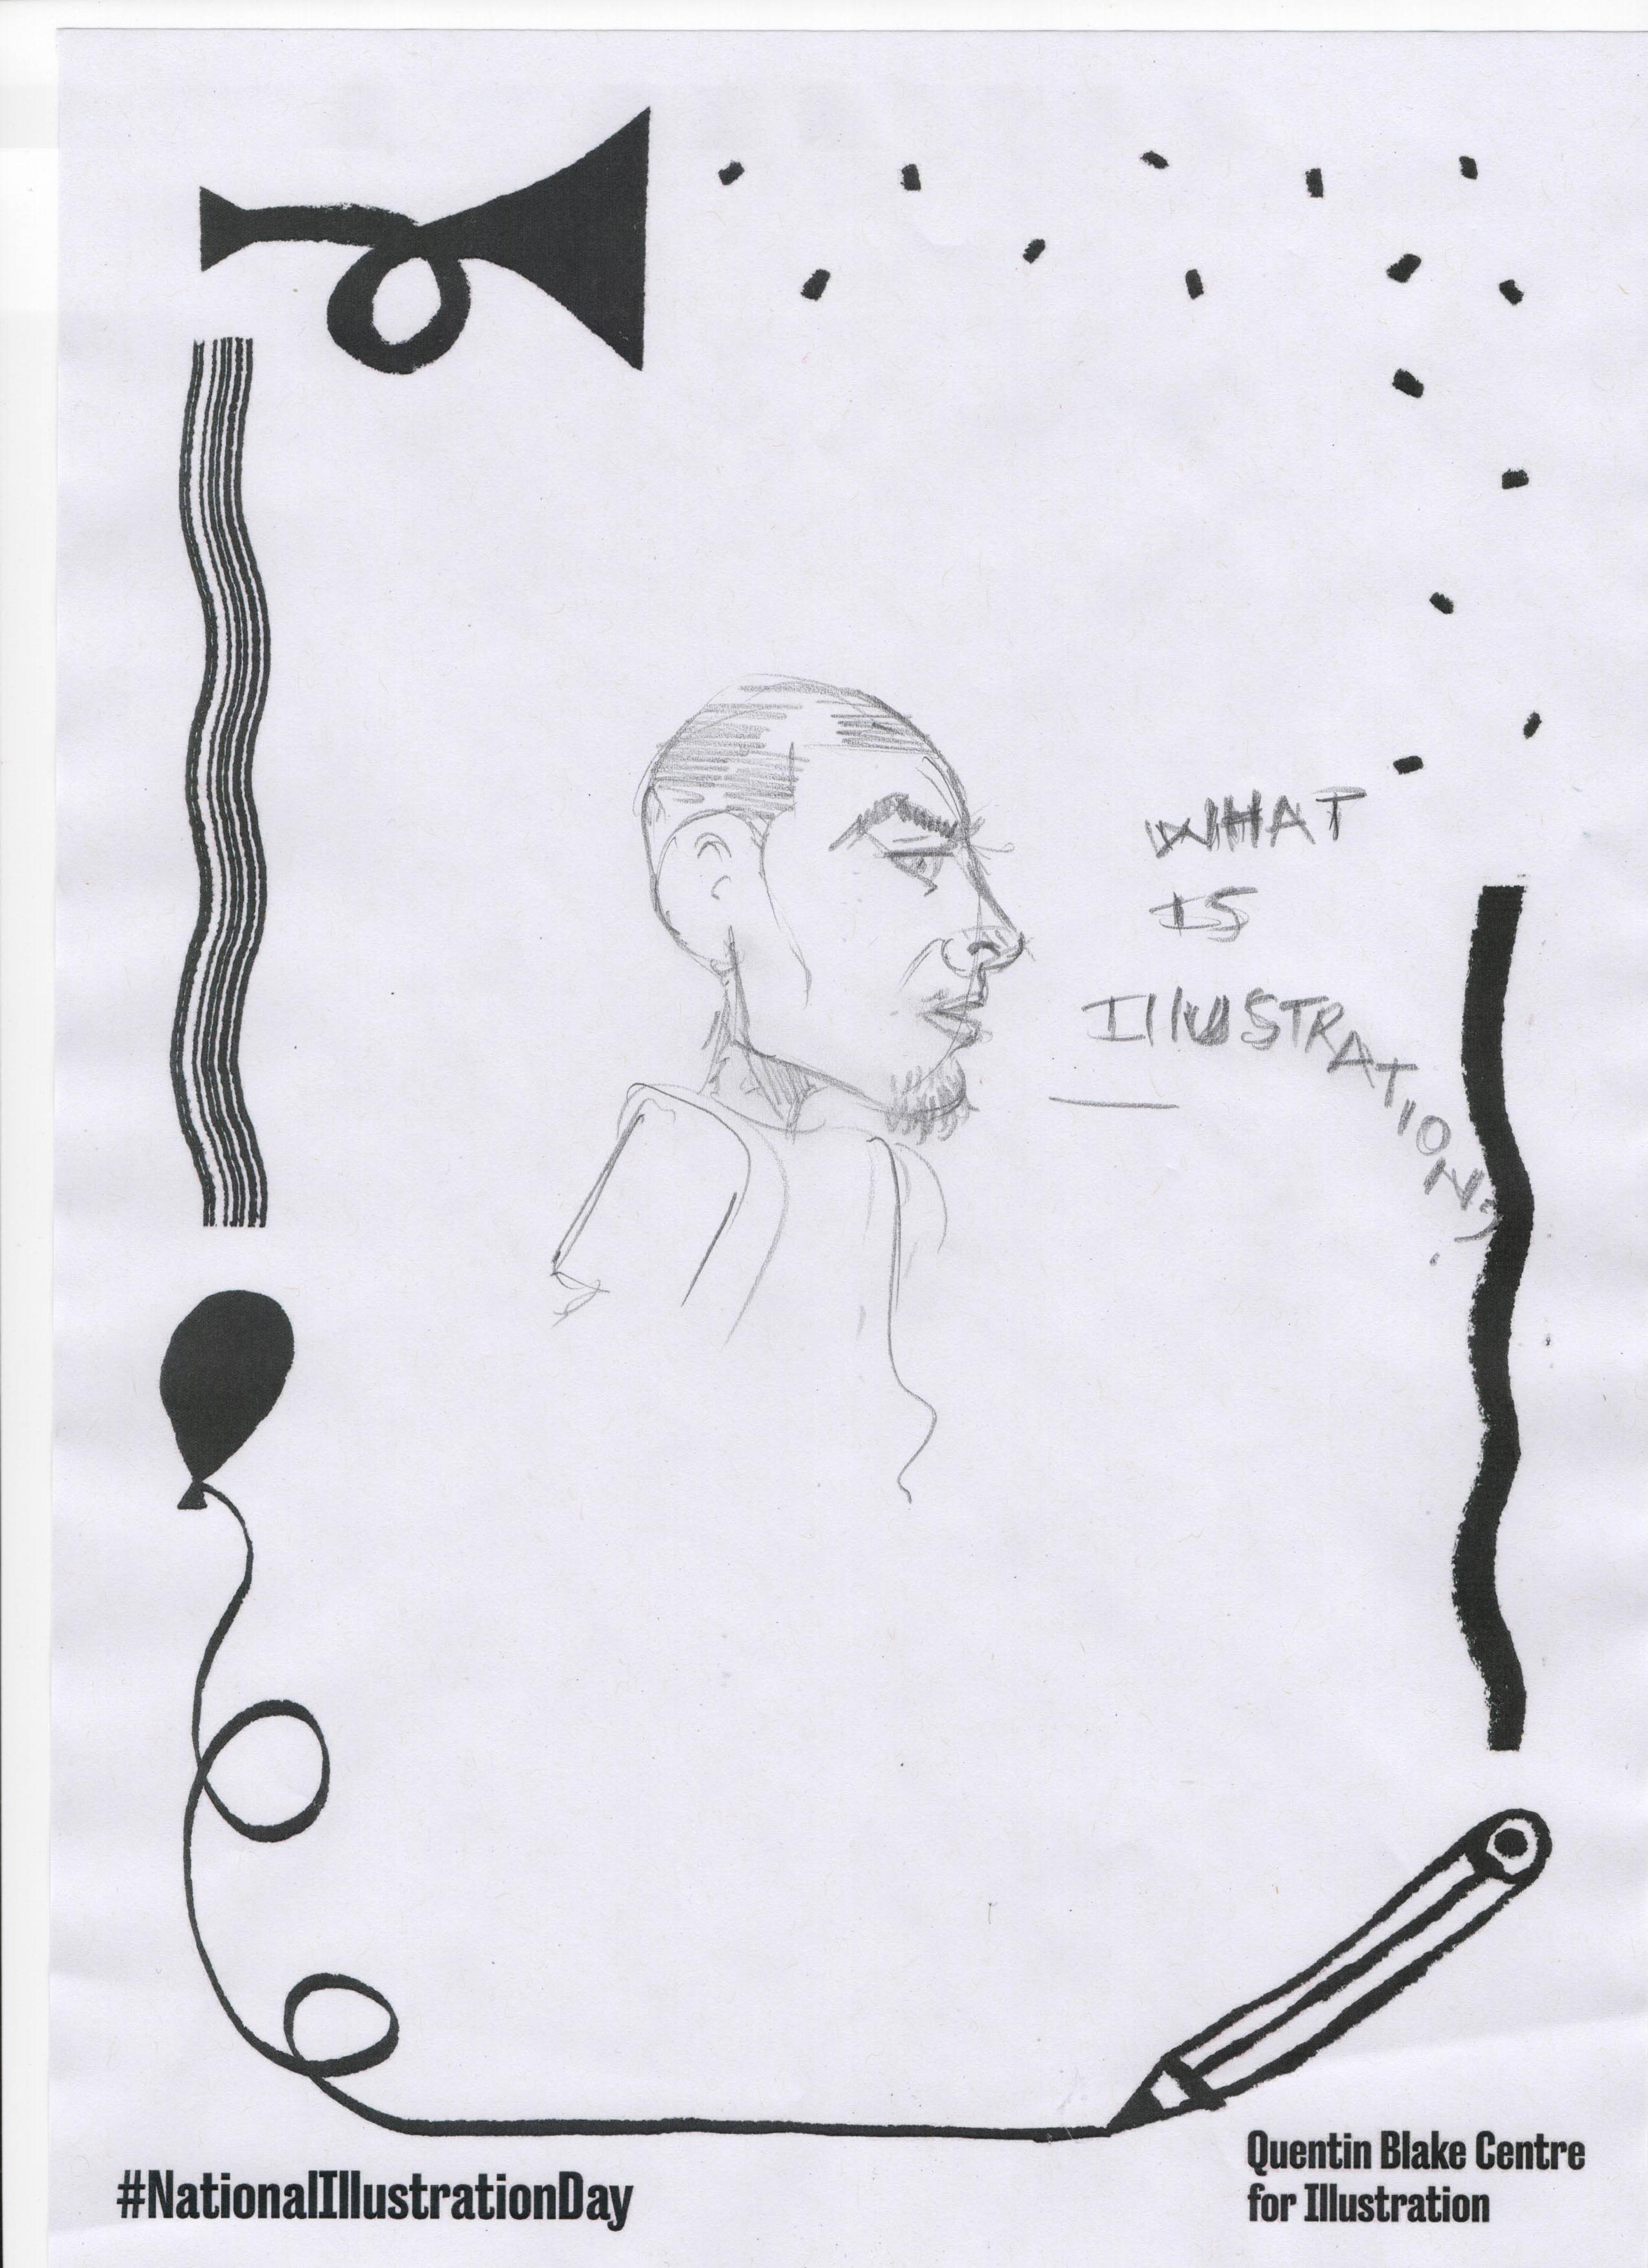 Illustration of a person saying 'what is illustration?' on paper.